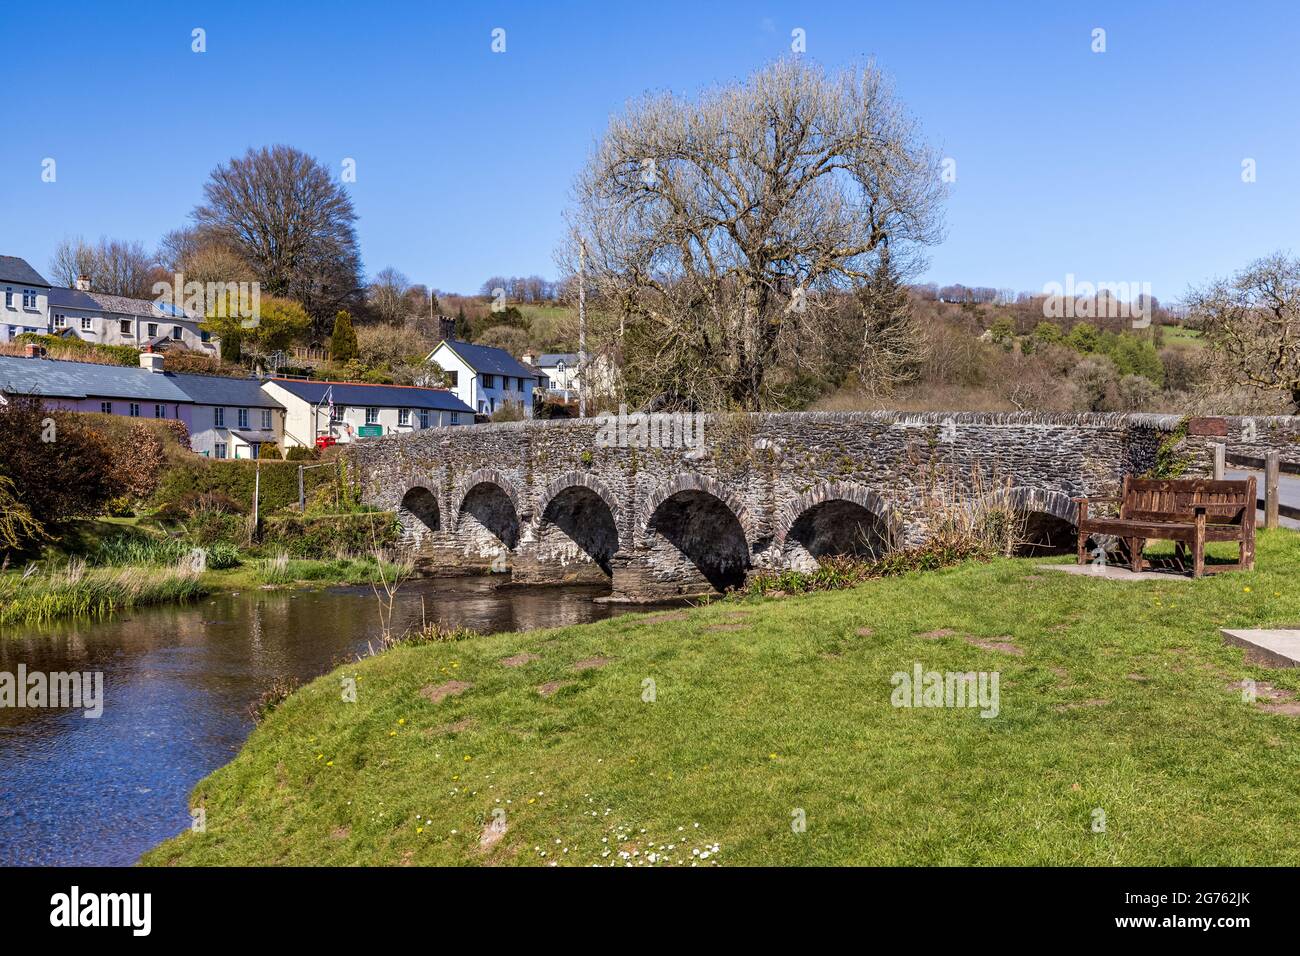 The picturesque Withypool Bridge over the River Barle in Exmoor, Somerset. Stock Photo